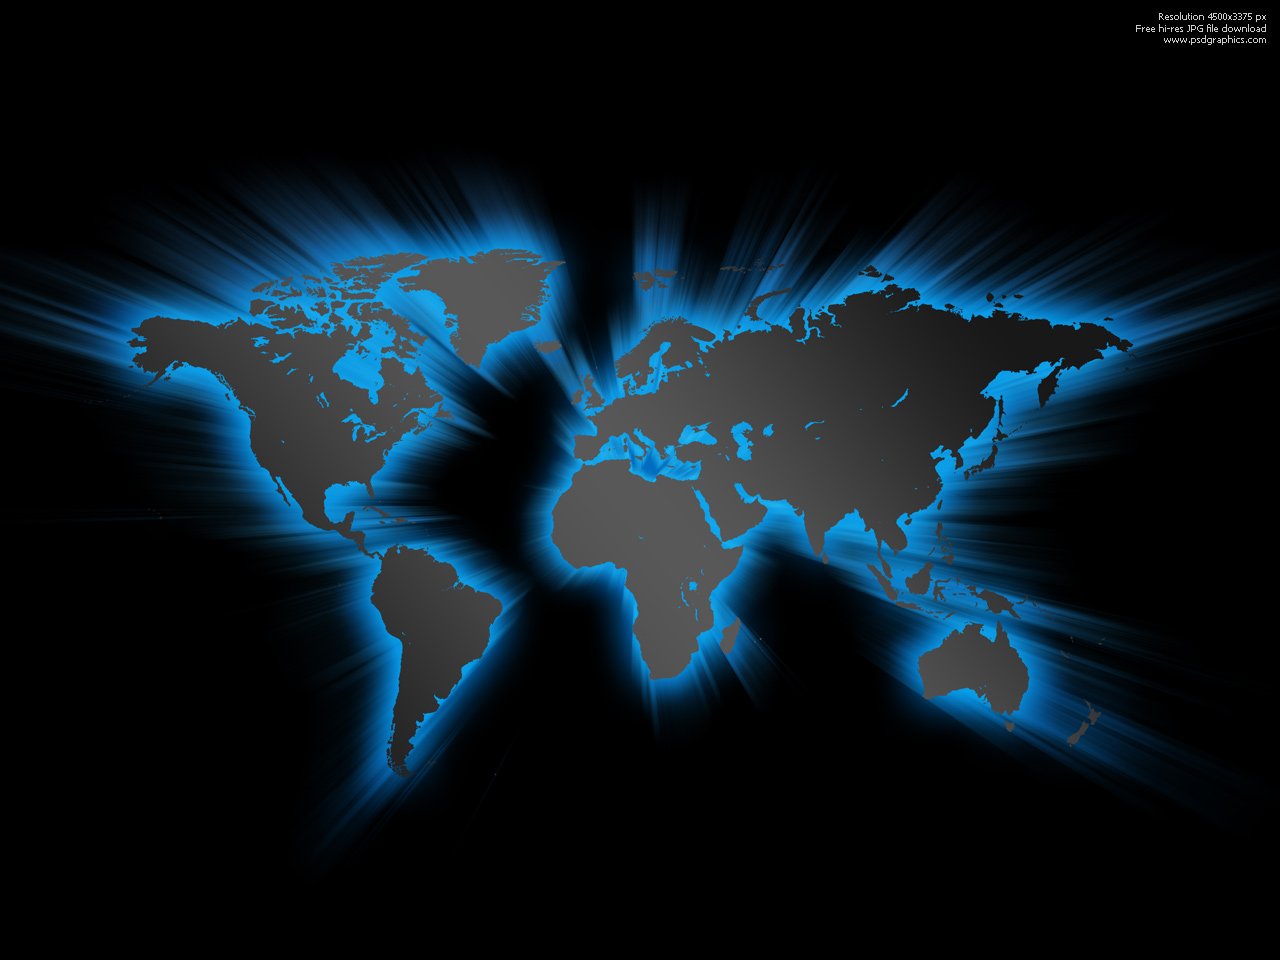 Glowing world map background. Size: 2,62 MB Format: JPG